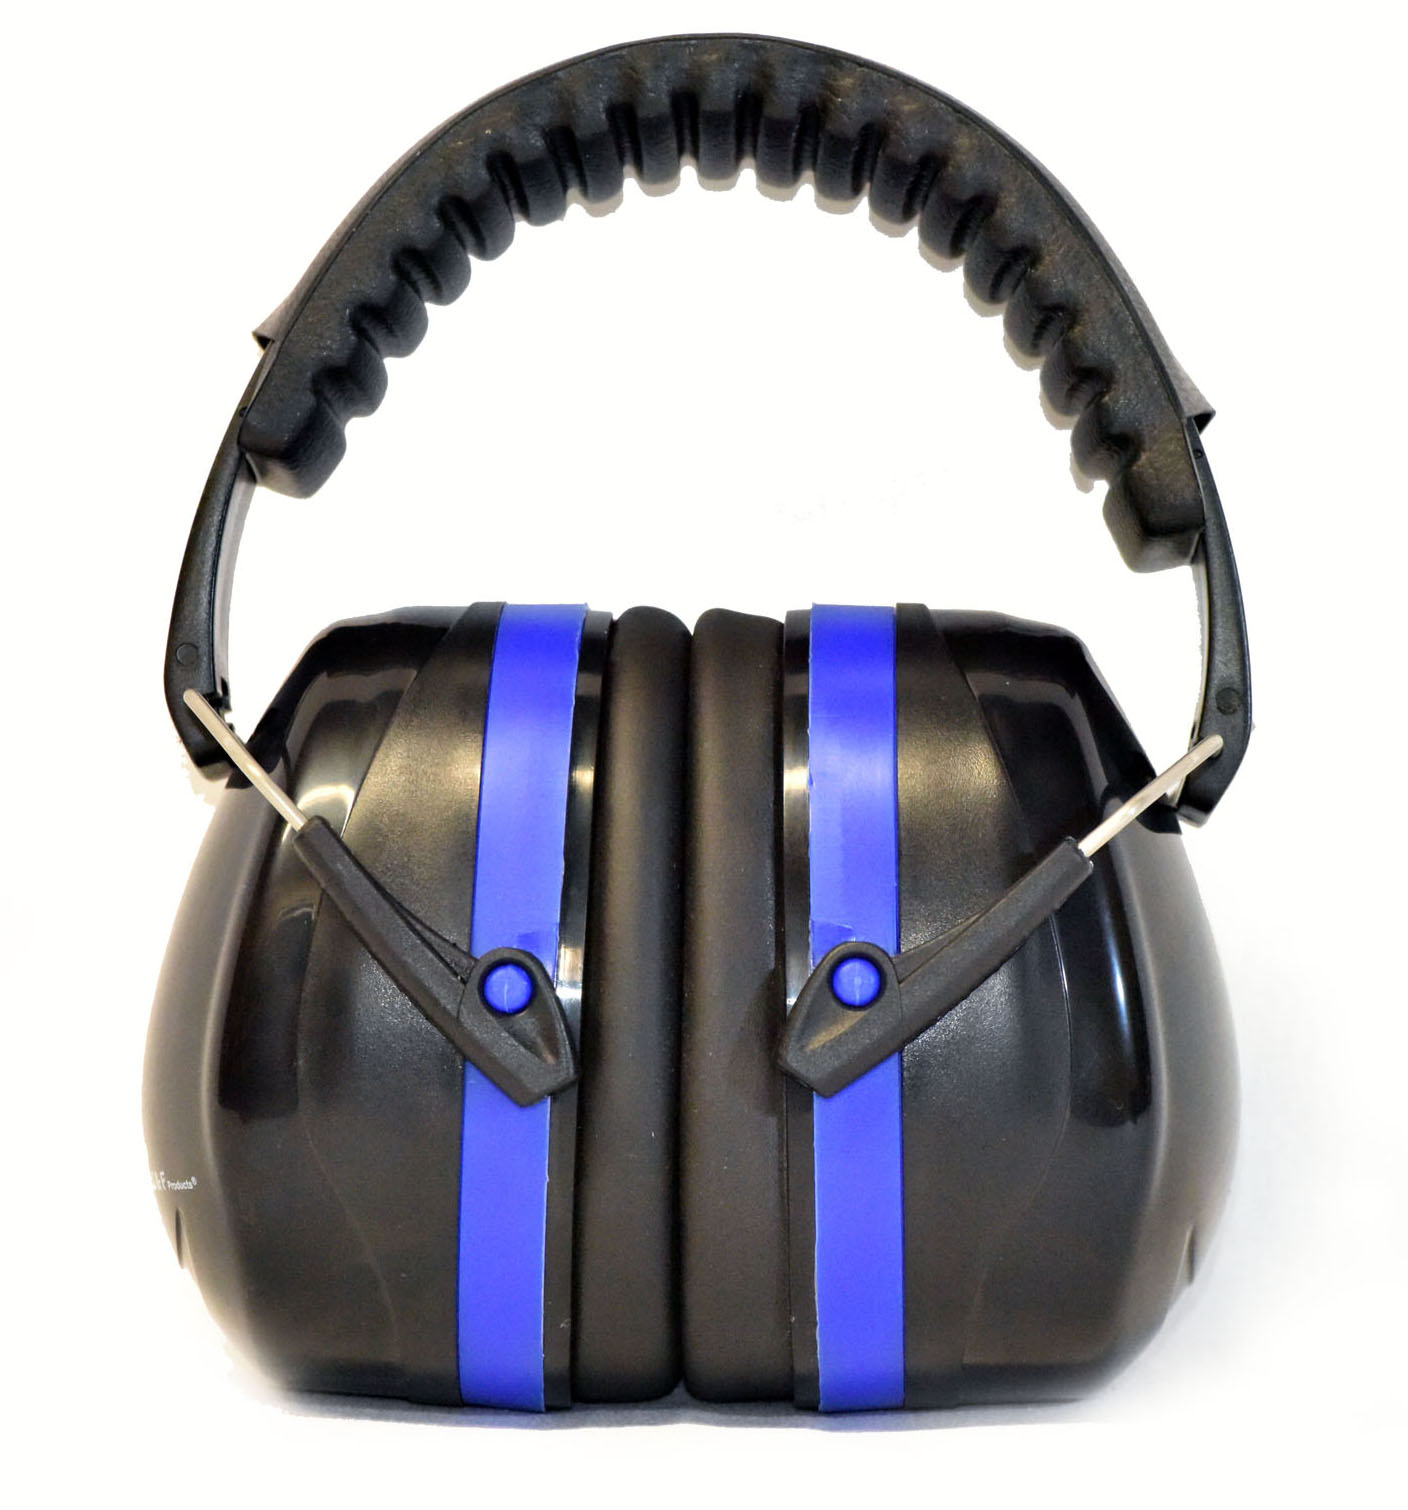 G & F Products Ears Protection, 26dB up to 41dB Highest NRR Safety Earmuffs - image 1 of 7